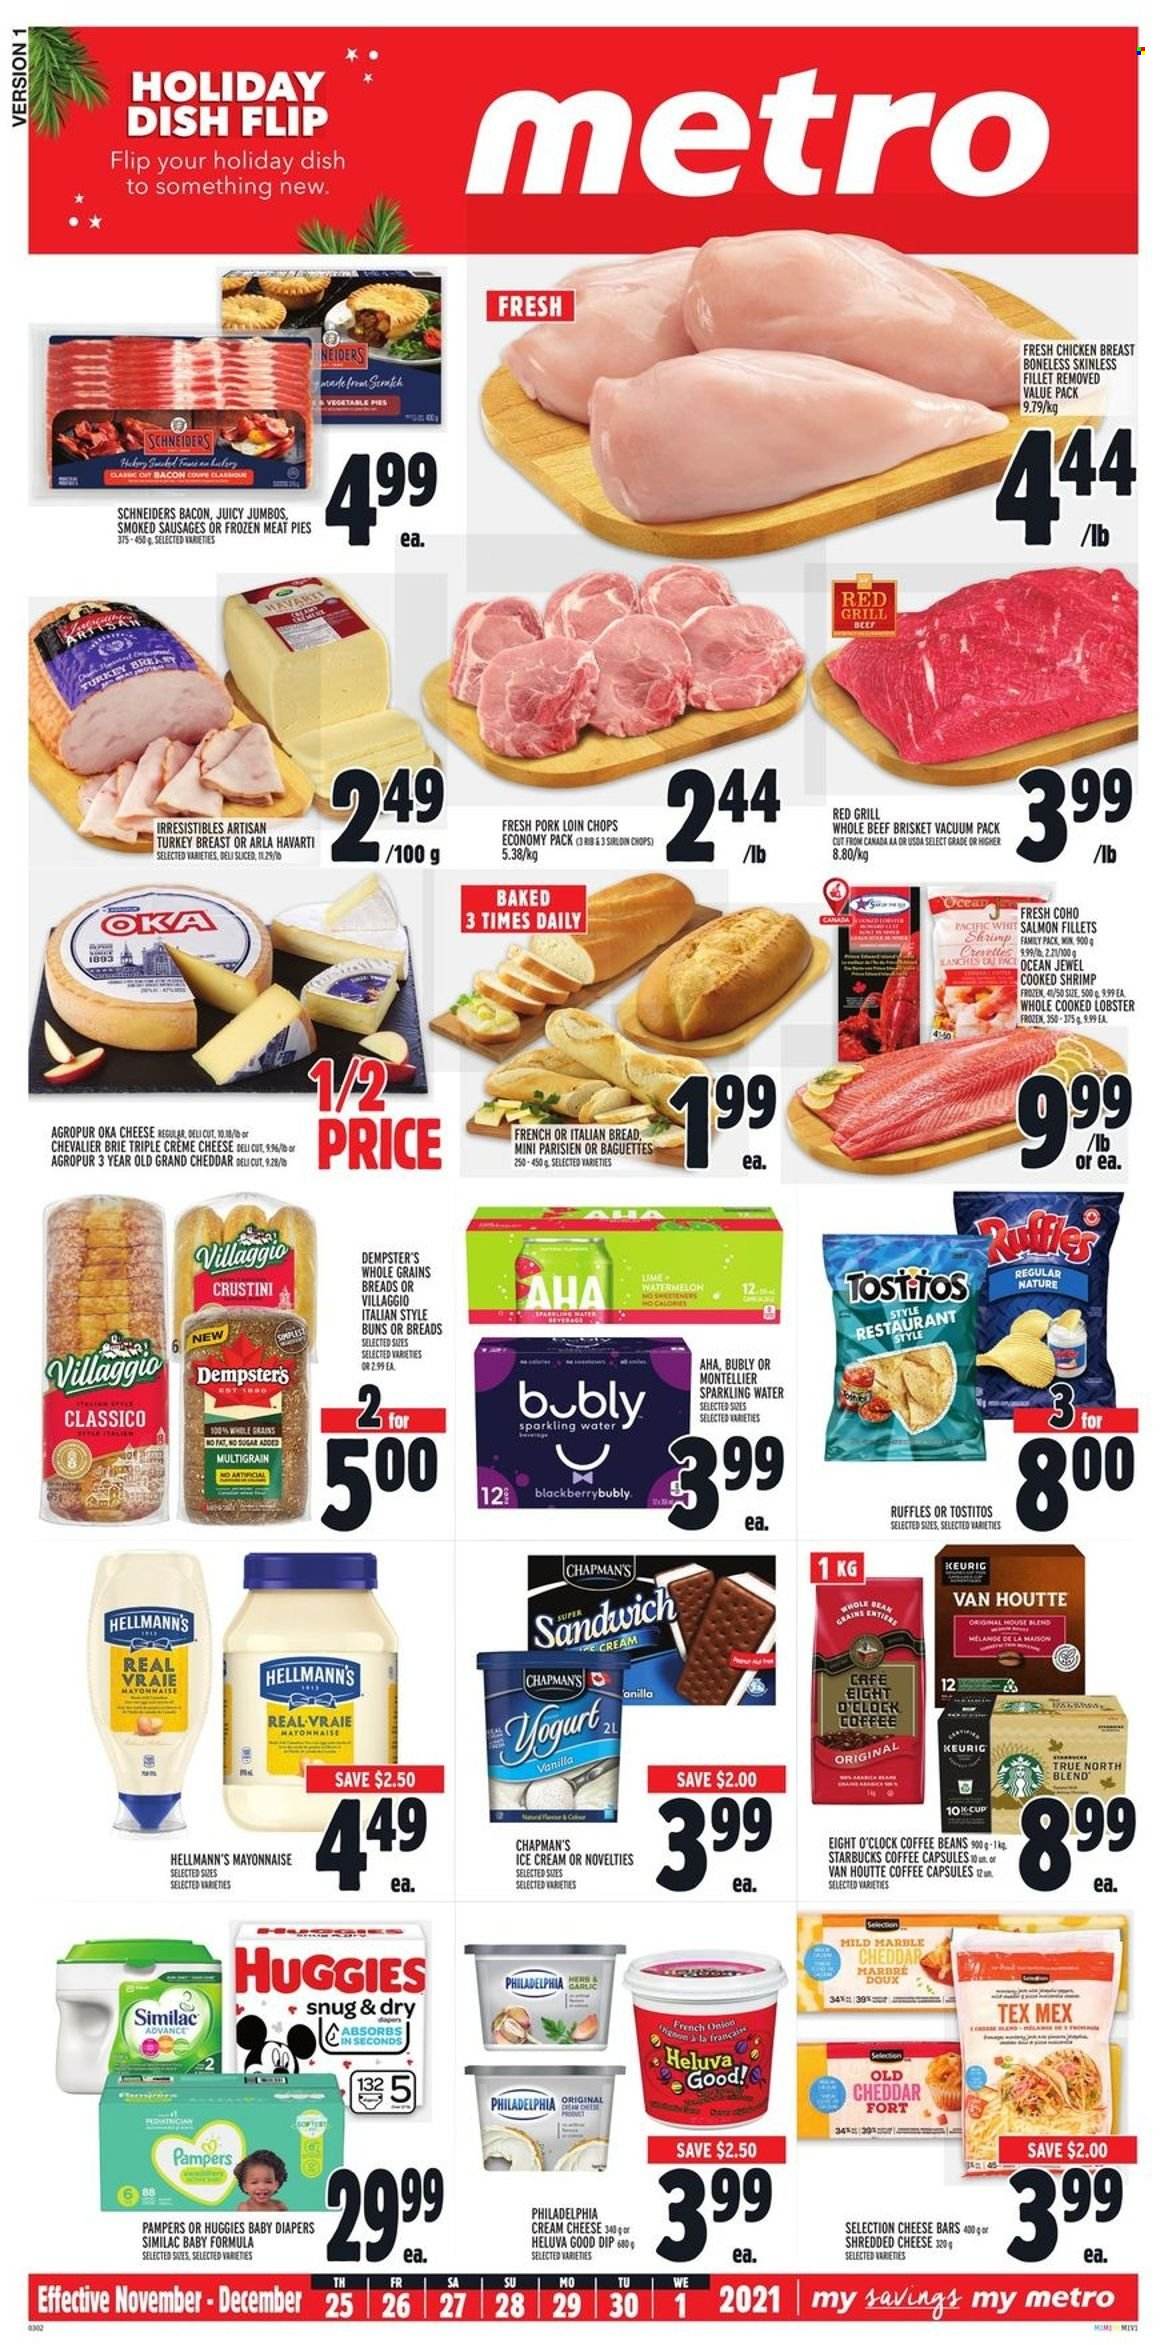 thumbnail - Metro Flyer - November 25, 2021 - December 01, 2021 - Sales products - buns, watermelon, lobster, salmon, salmon fillet, shrimps, sandwich, bacon, sausage, cream cheese, shredded cheese, Havarti, brie, Arla, mayonnaise, dip, Hellmann’s, ice cream, Ruffles, Tostitos, Classico, sparkling water, coffee beans, coffee capsules, Starbucks, Keurig, Eight O'Clock, Similac, turkey breast, chicken breasts, chicken, turkey, beef meat, beef brisket, pork chops, pork loin, pork meat, nappies, baguette, Huggies, Philadelphia, Pampers. Page 1.